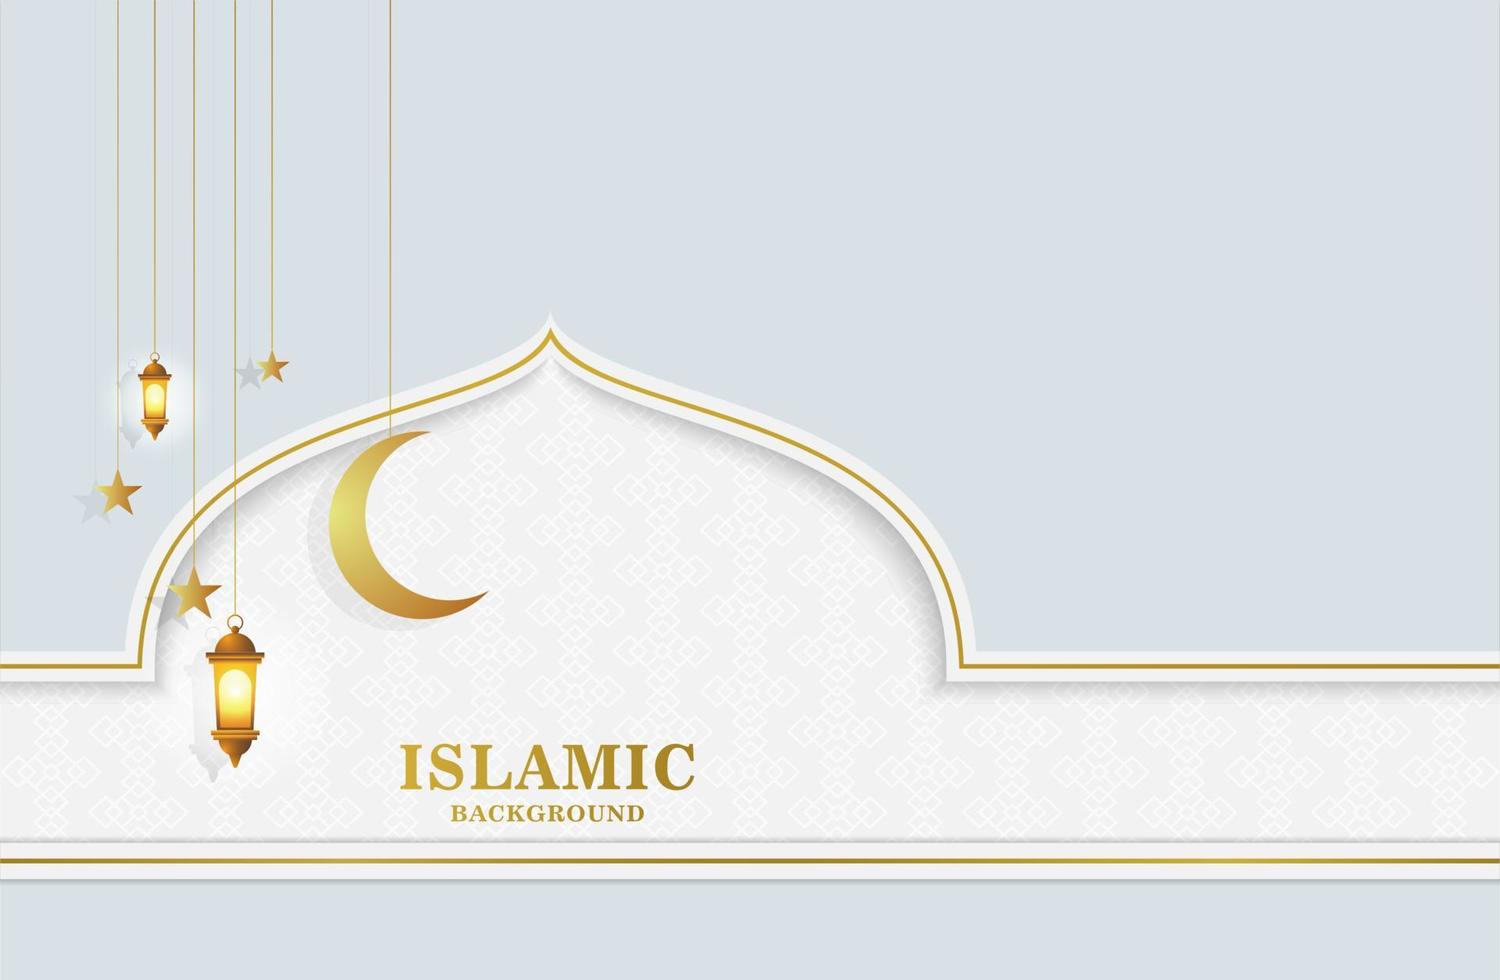 Modern and elegant white and gold islamic background vector